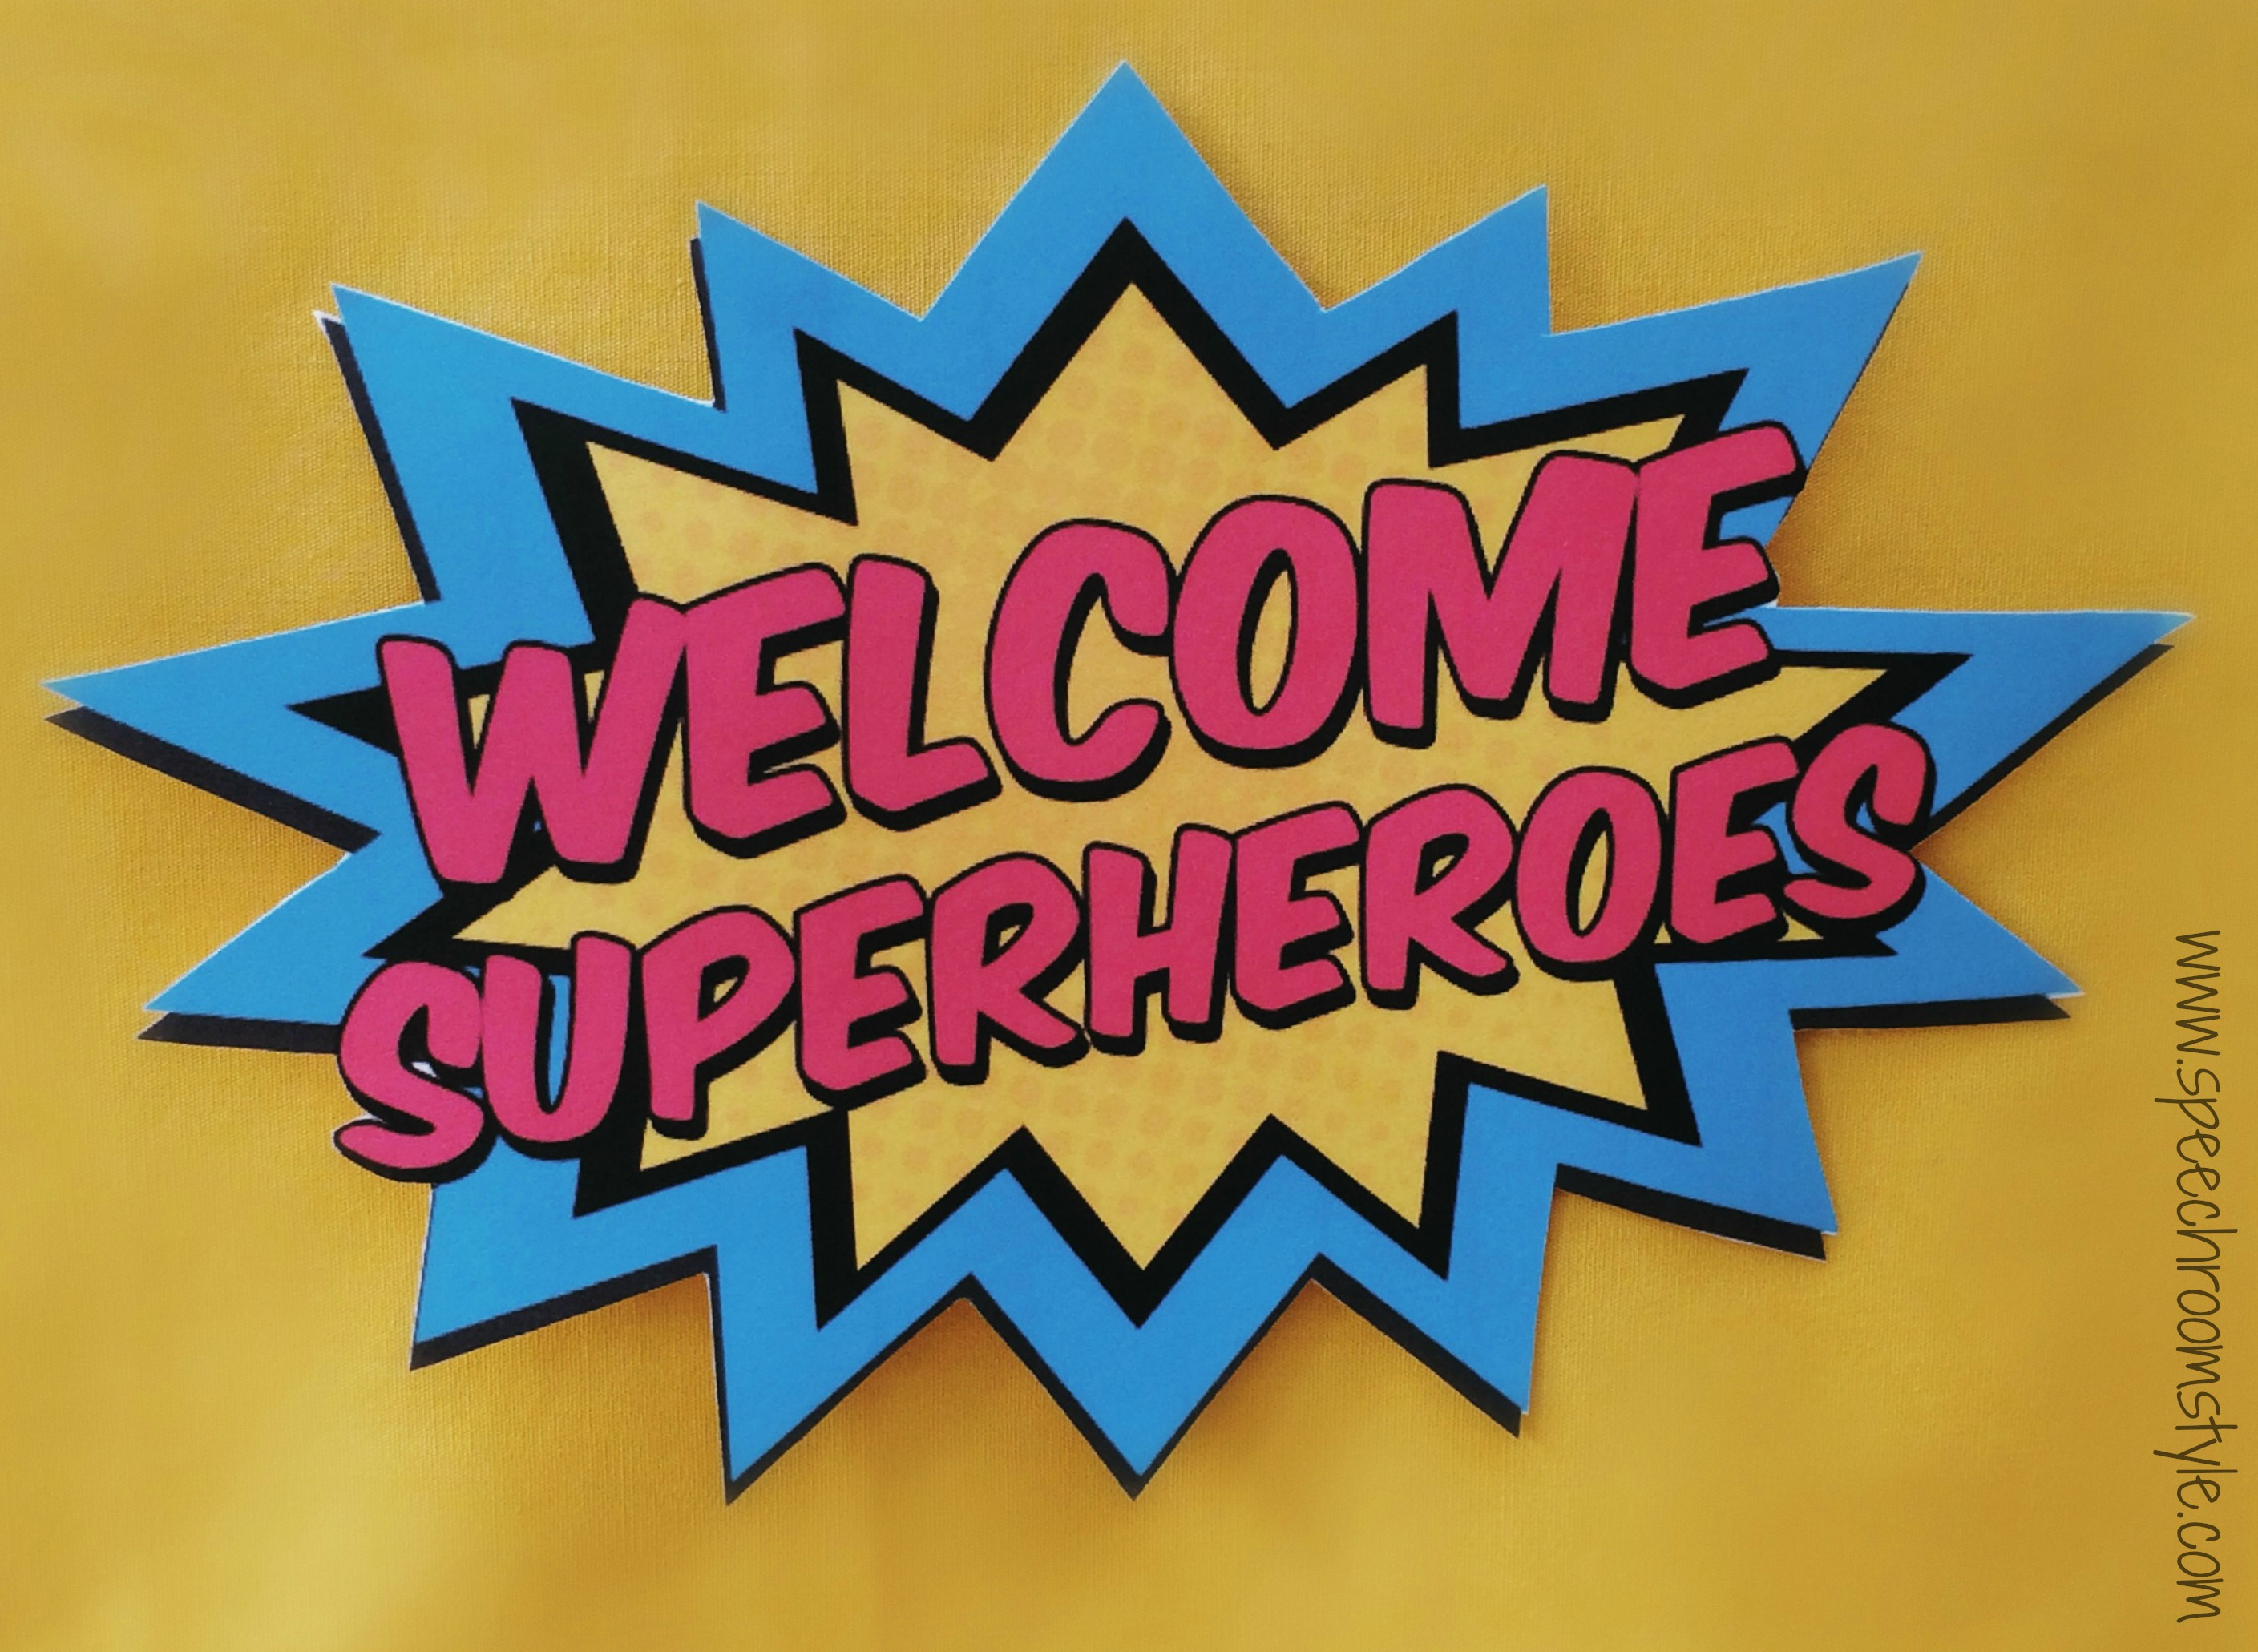 http://www.speechroomstyle.com/wp-content/uploads/2014/04/Welcome-Superhero-pic.jpg